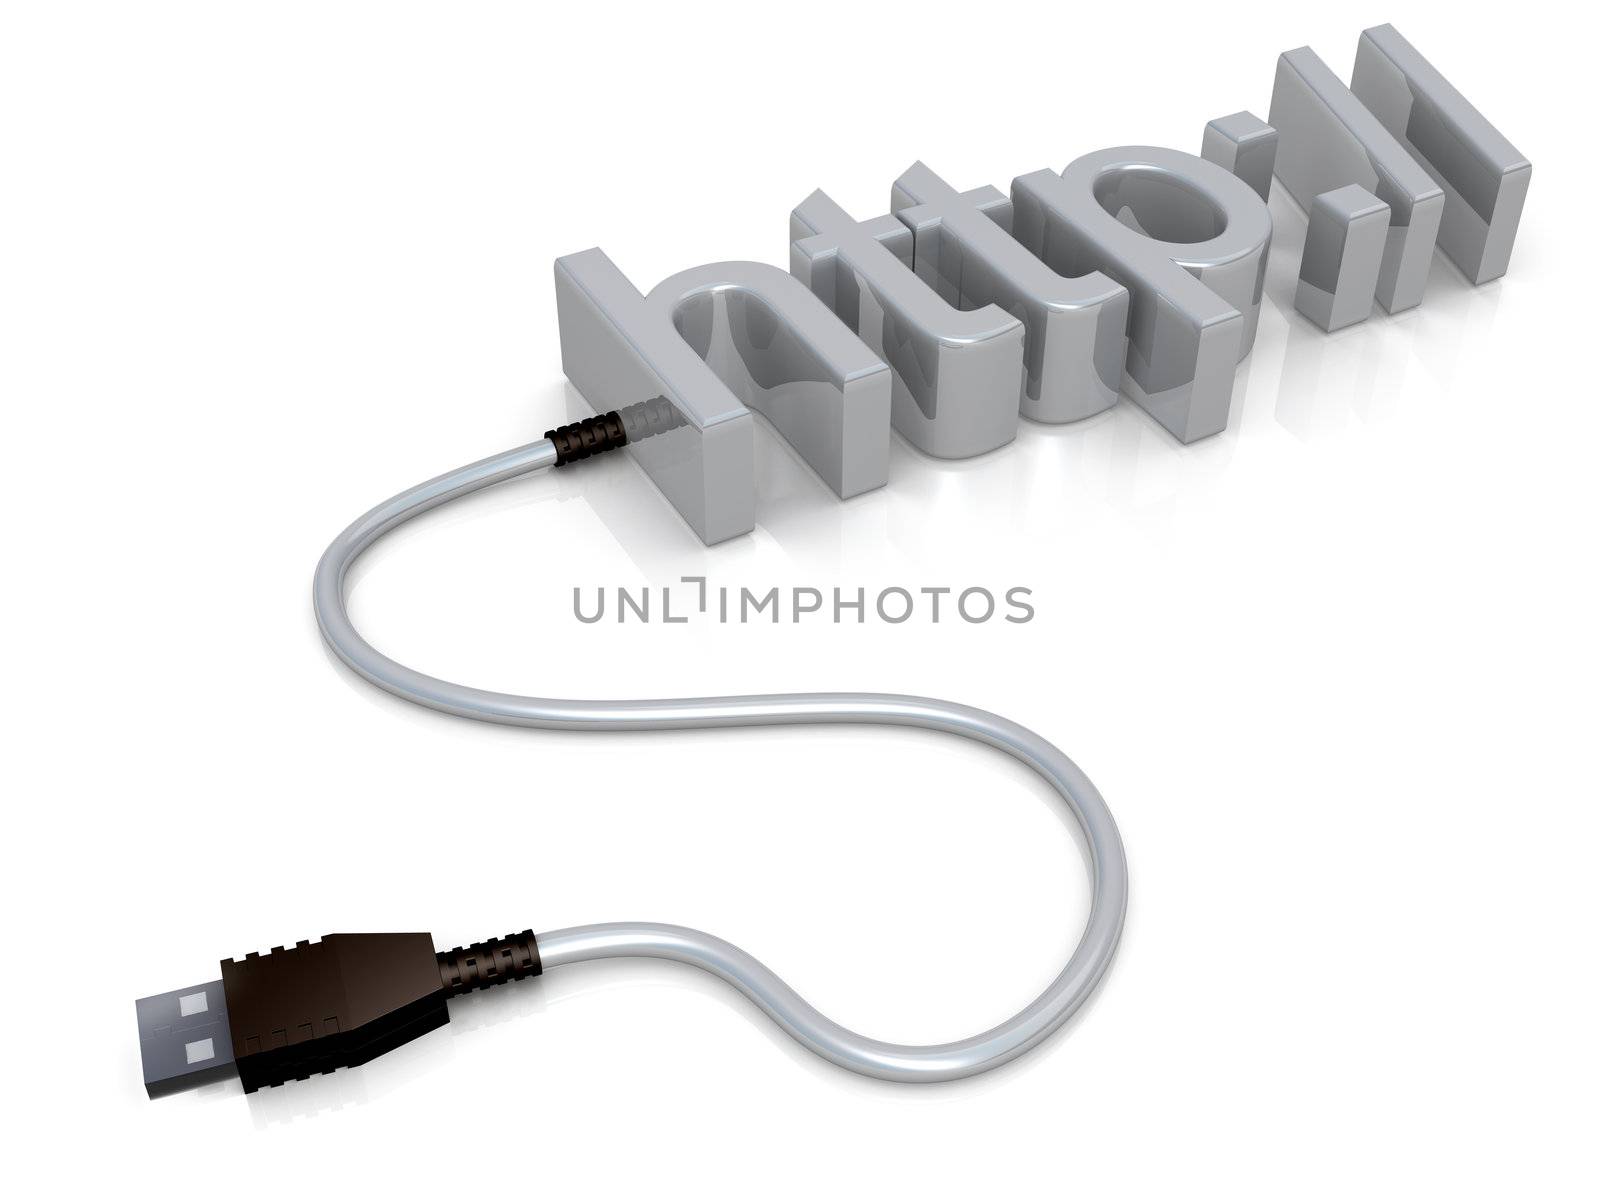 The word "http" with a usb cable attached to it.